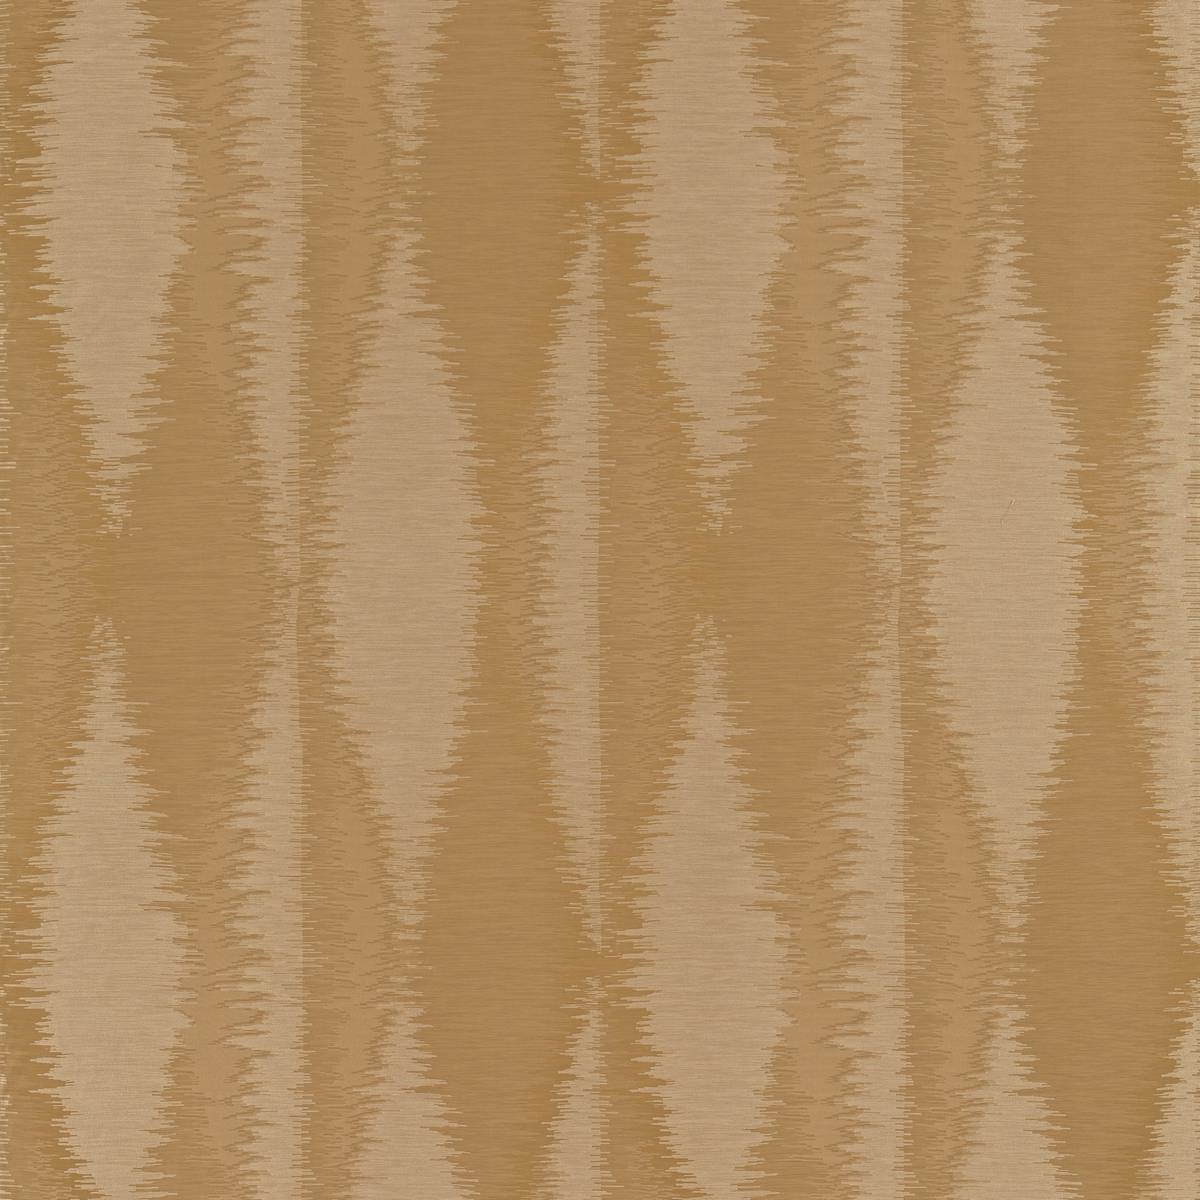 Umi Taupe Fabric by Zoffany